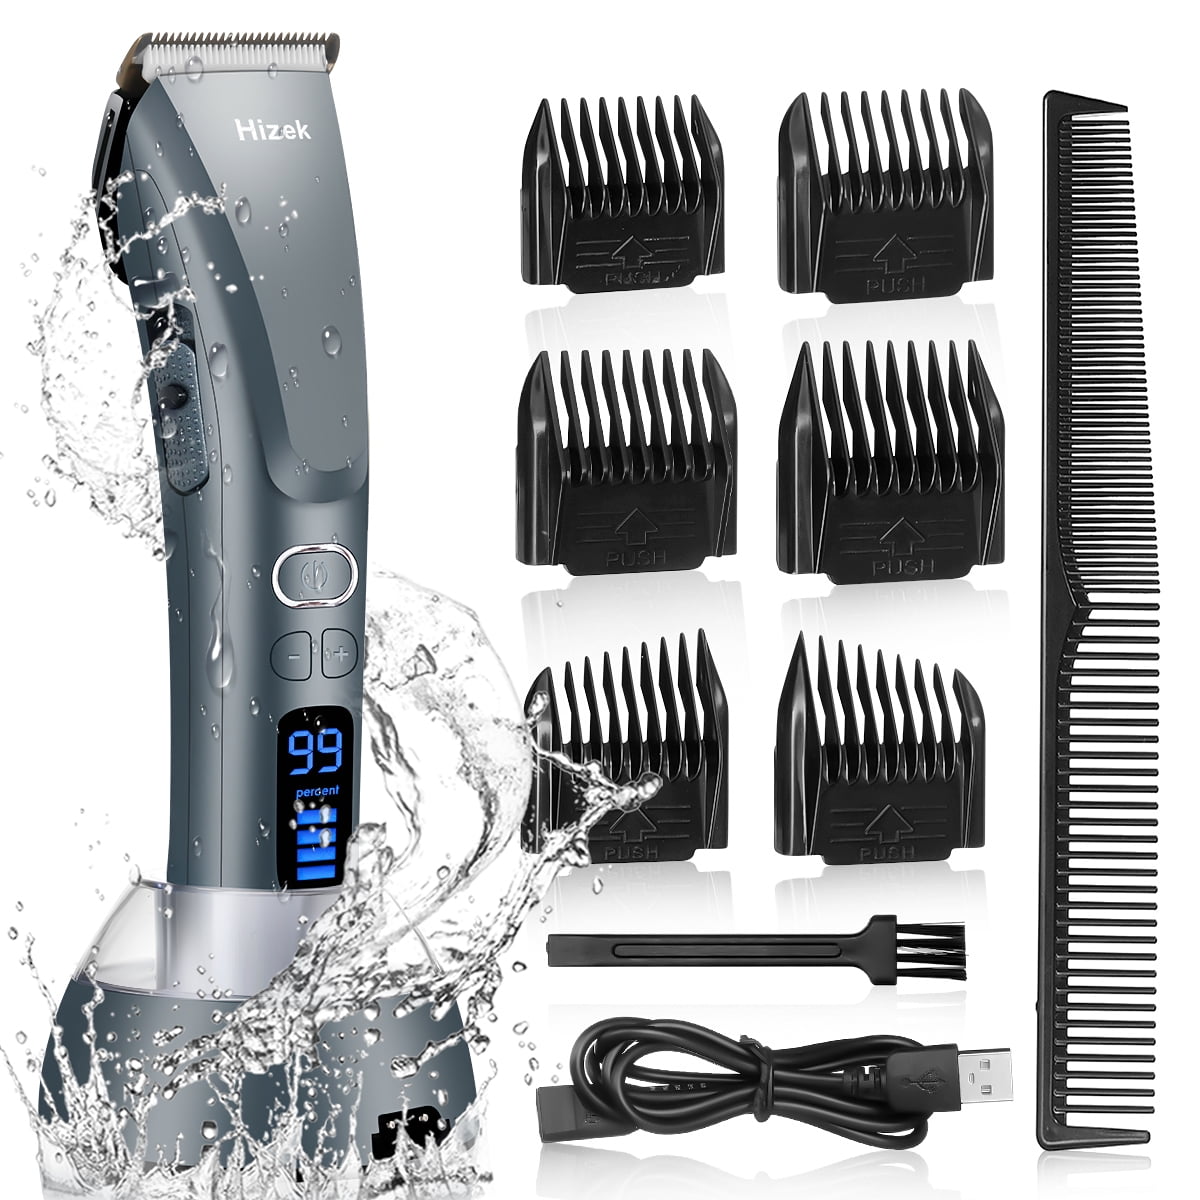 Hair Trimmer for Men Professional Hair Trimmer Cordless Hair Cutting Kit  Beard Trimmer, with 3 Trimming Speeds,Charging Dock,LED Display -  